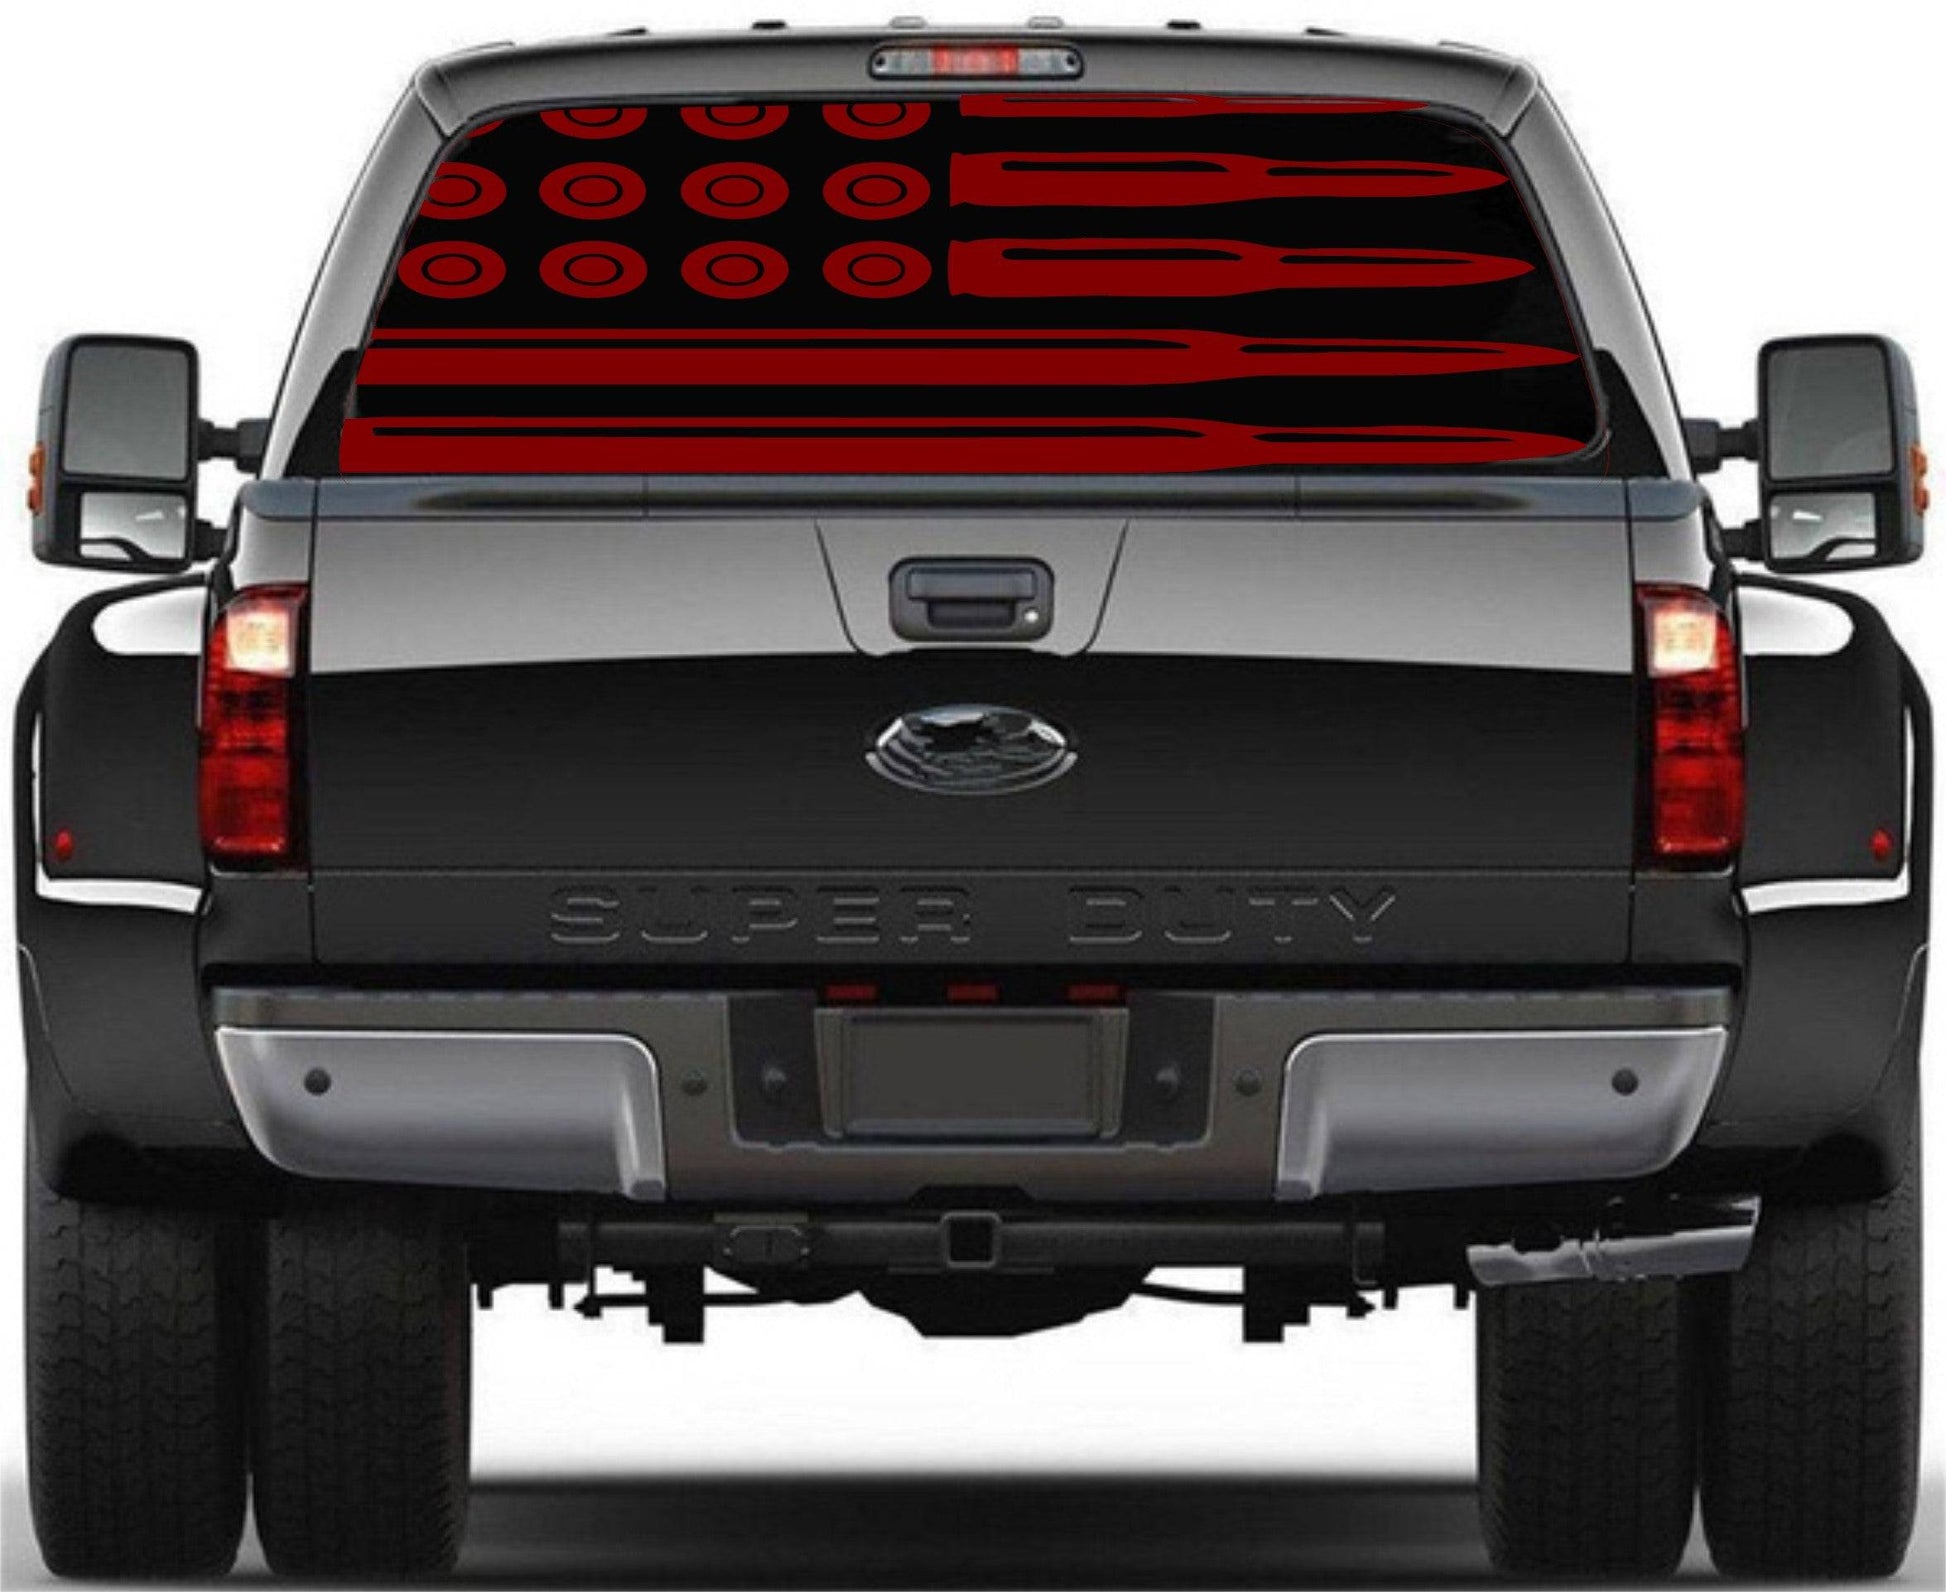 2nd Amendment Rights Gun Rights American Flag Decal Stickers Patriotic Vinyl Decal Inspired Bullets for Any Trucks, SUV's Rear Window